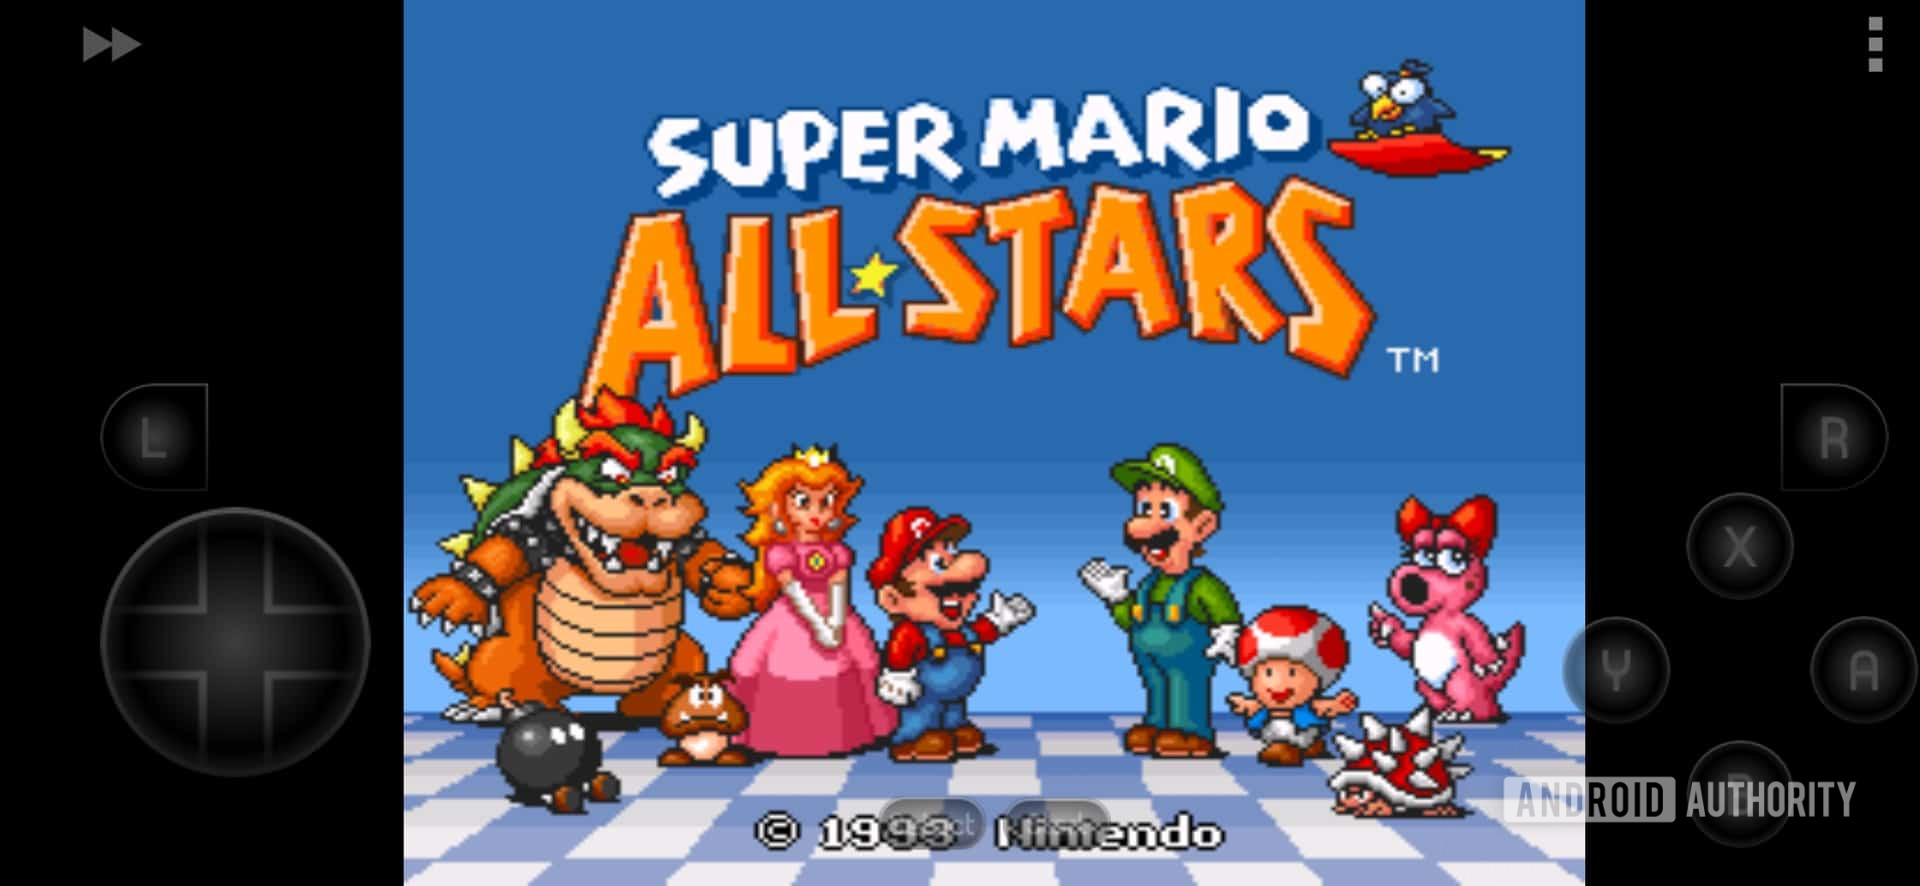 The SNES9X emulator on Android running Super Mario All-Stars from the SNES.